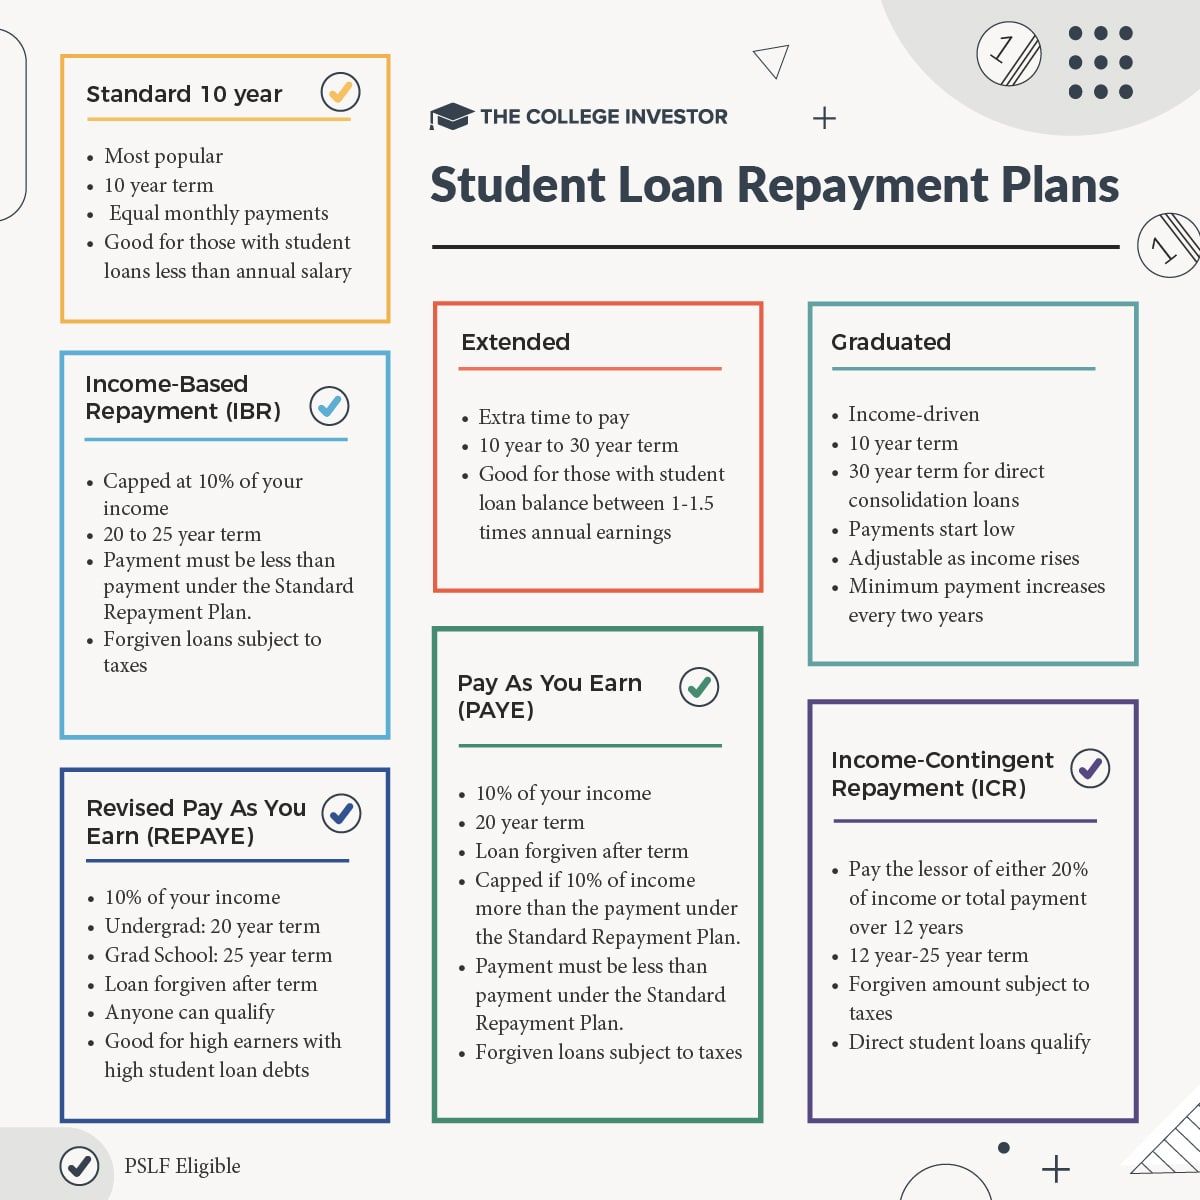 Student loan repayment plan infographic